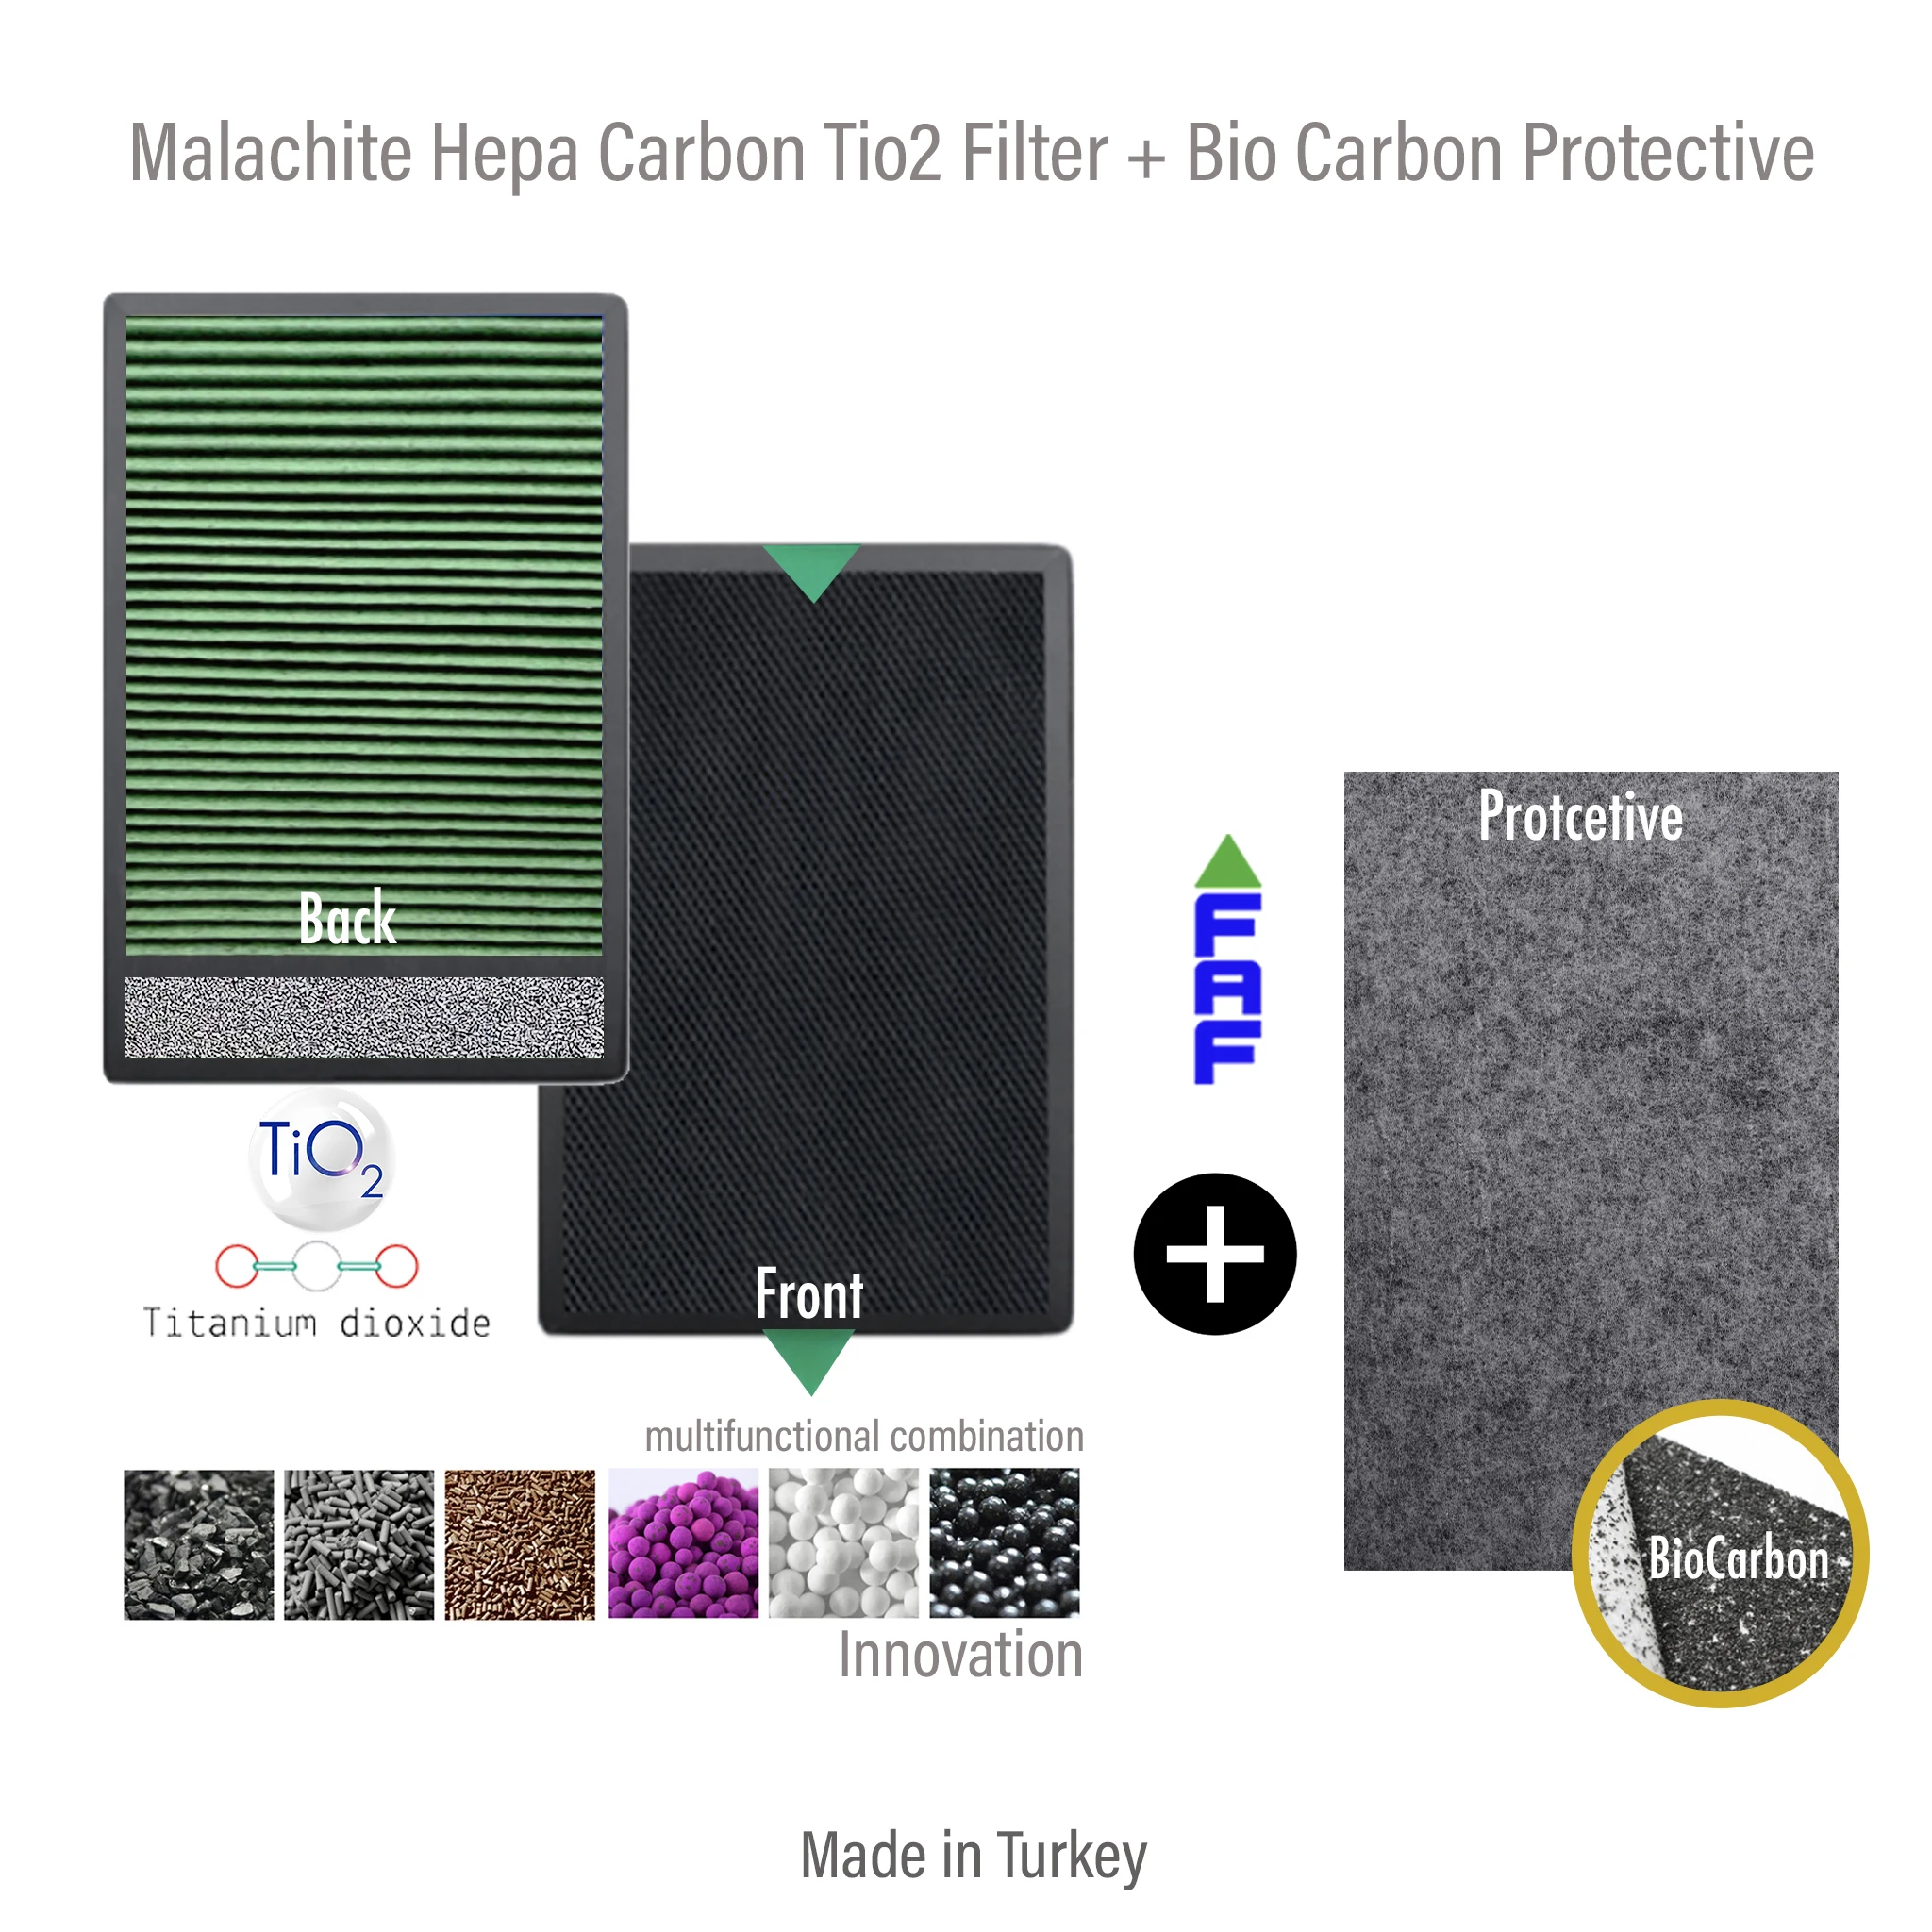 

Nikken Air Wellness Power5 Pro Air Purifier Compatible Filter TiO2 Hepa Carbon Malachite Multifunctional + Protective